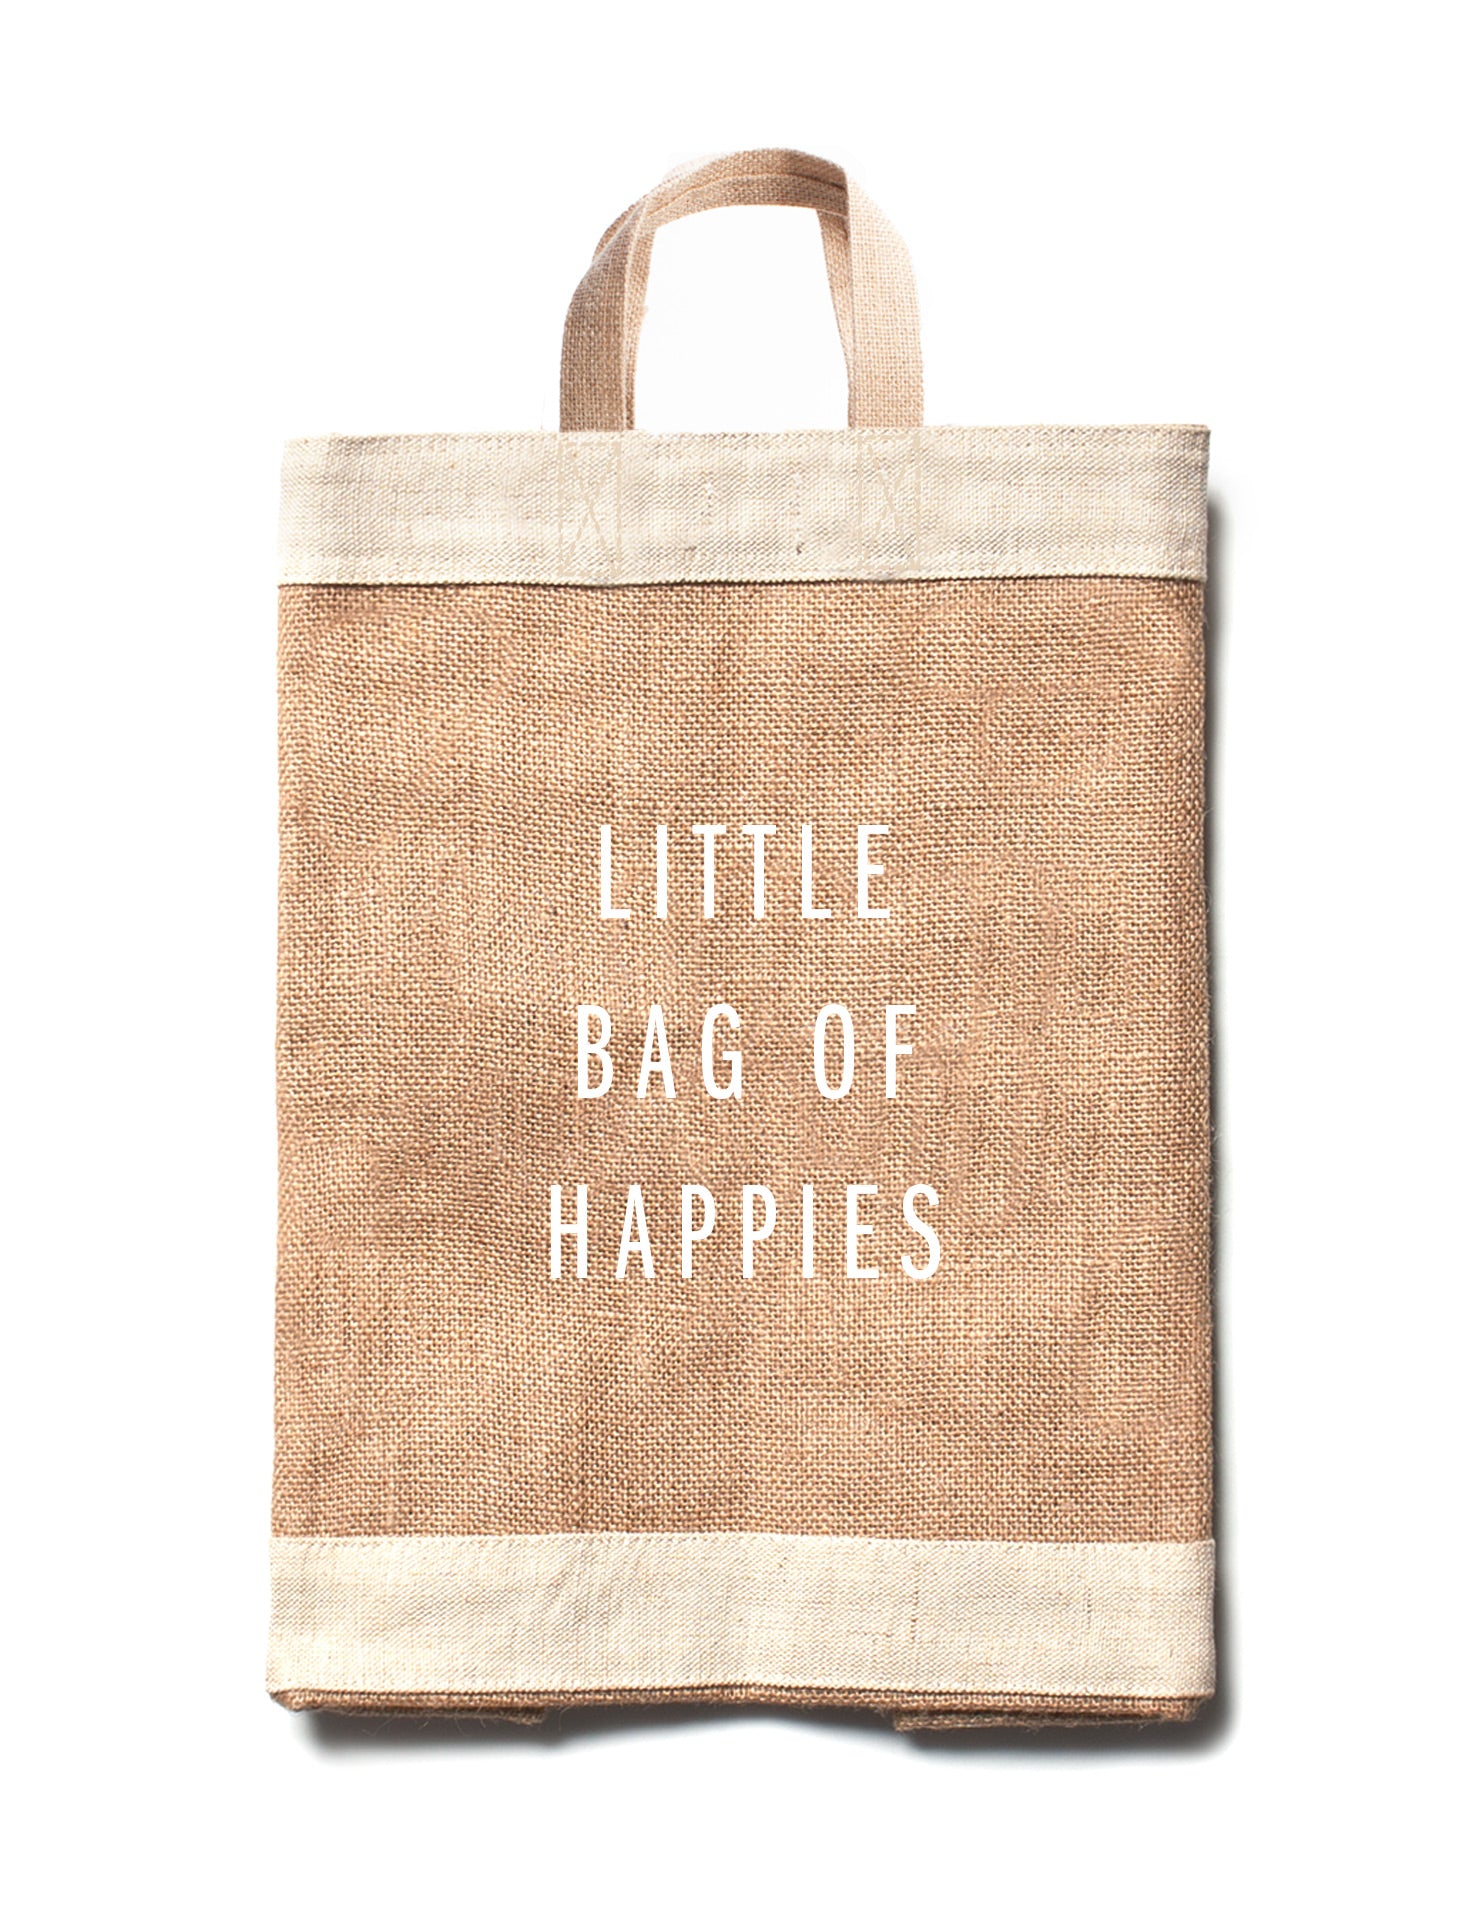 Apolis Holdings Little Bag Of Happies available at The Good Life Boutique